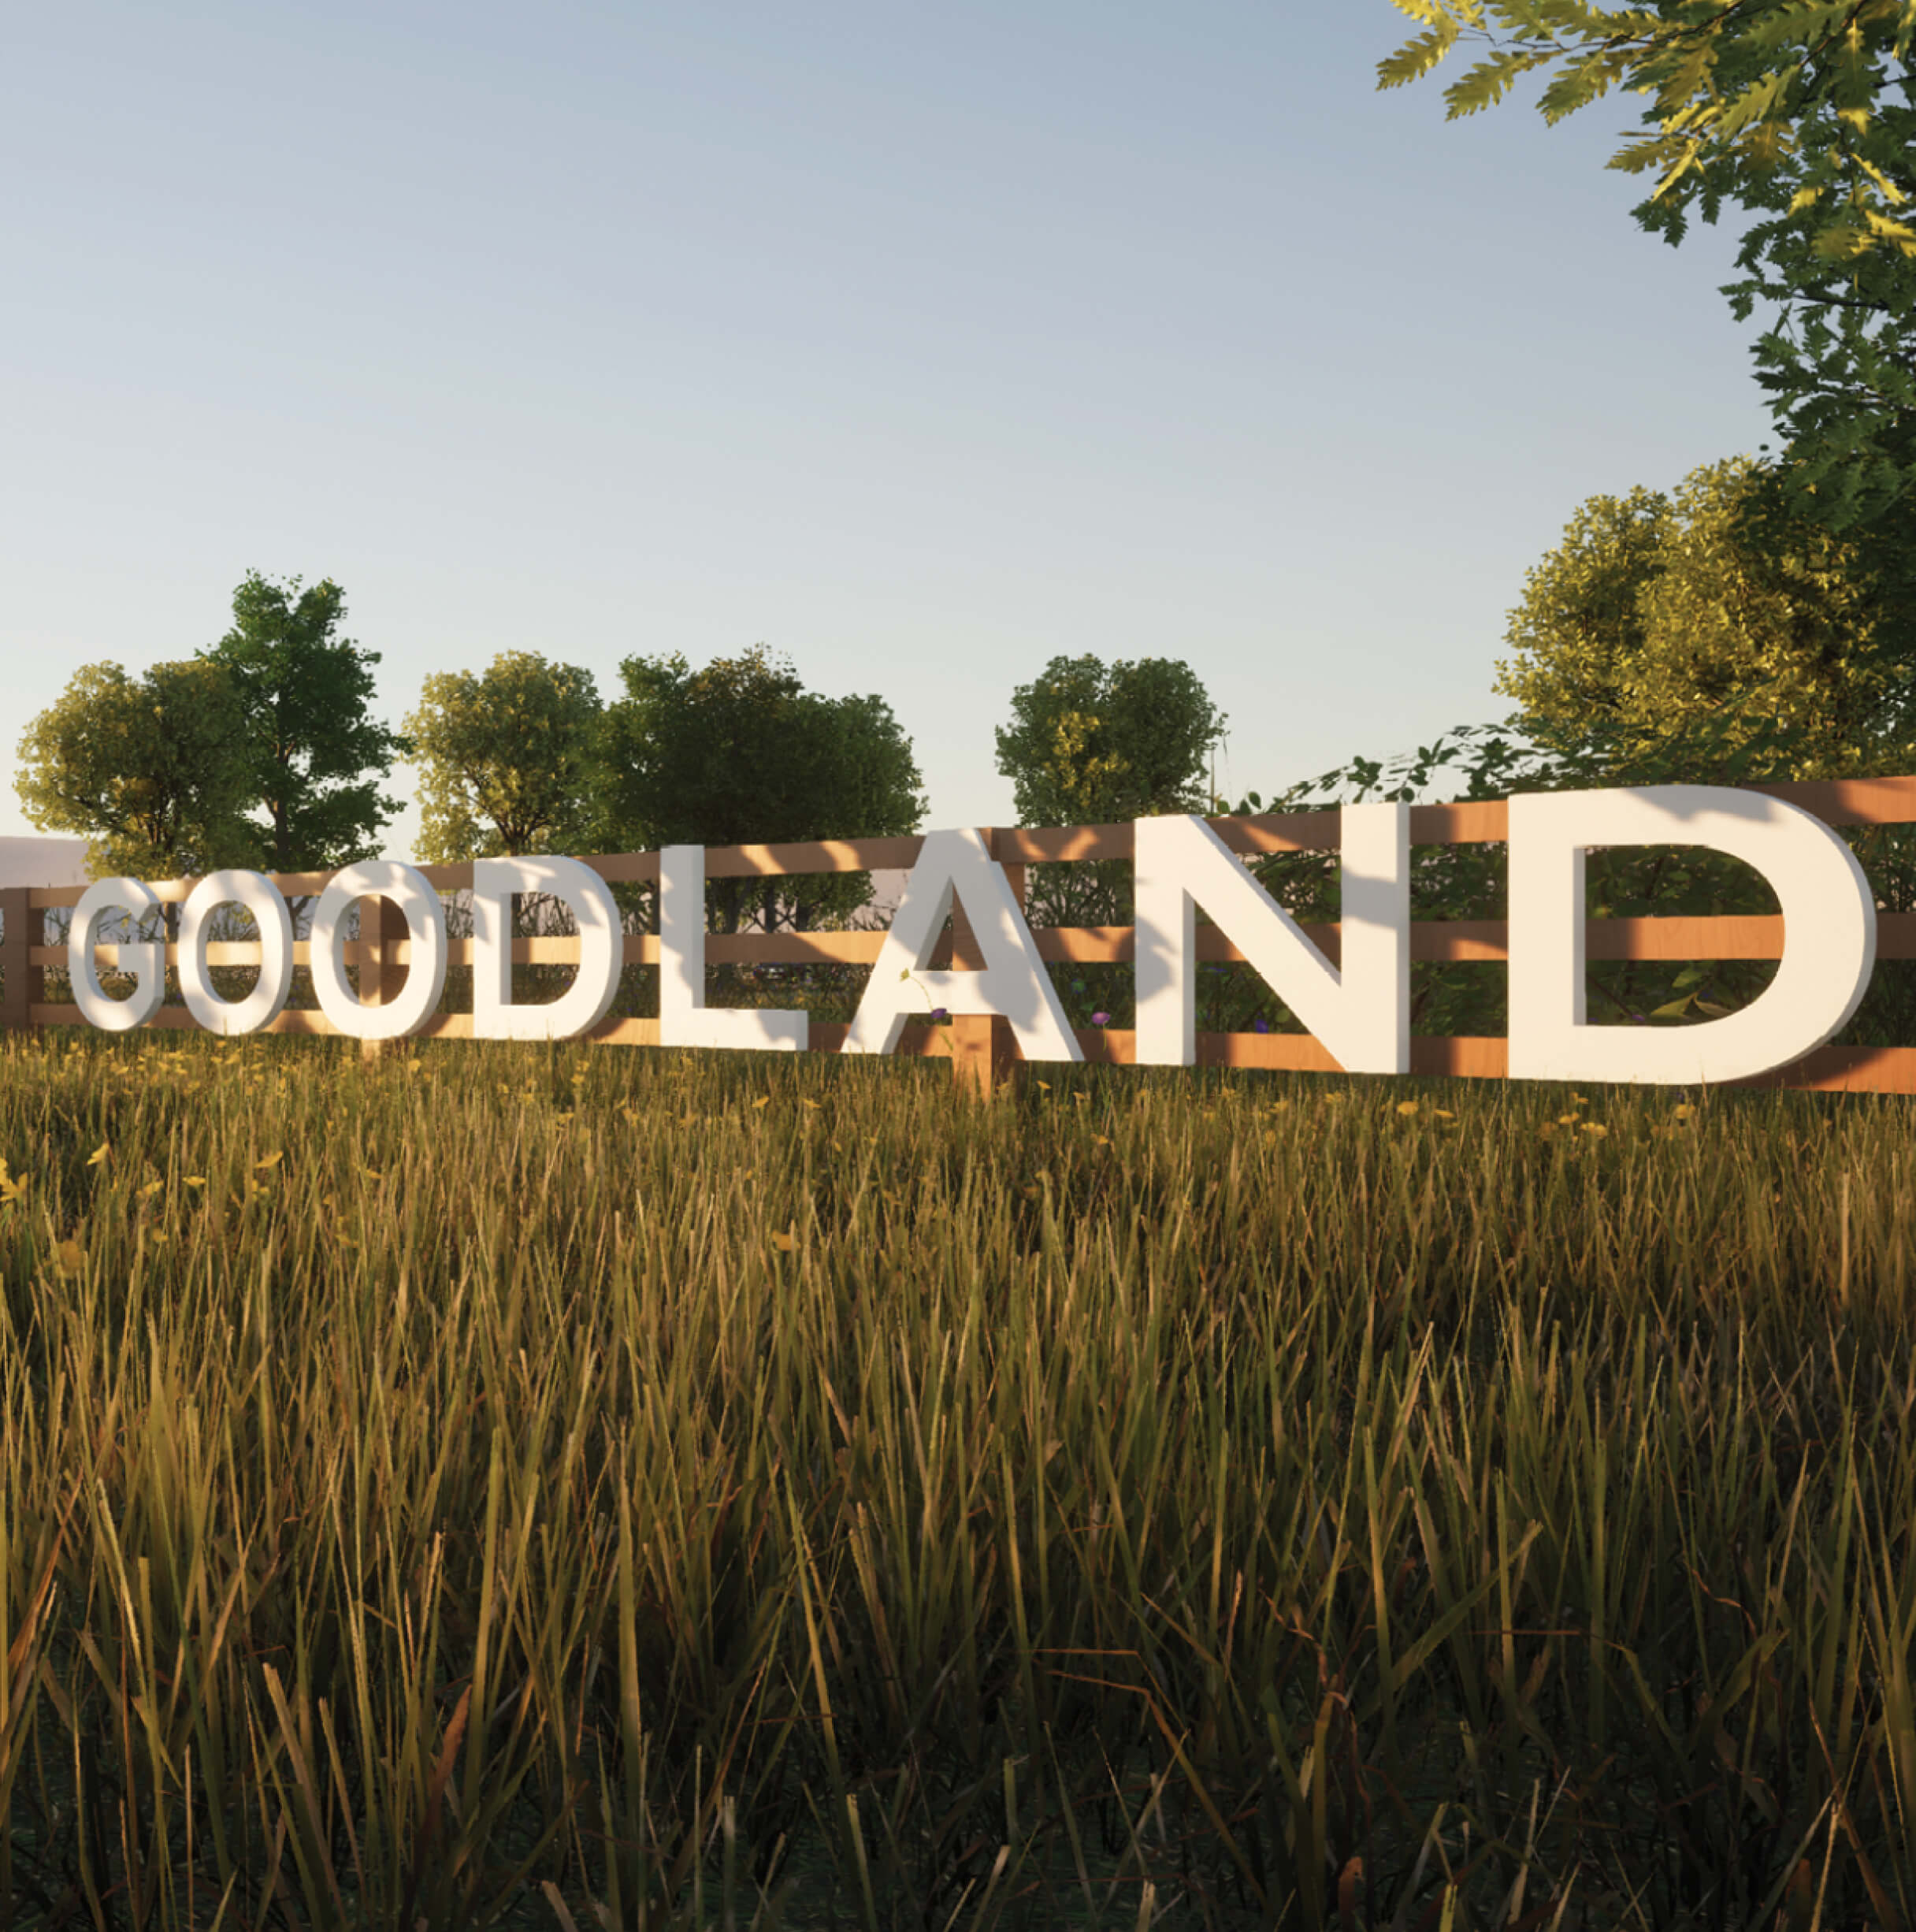 Large "Goodland" sign set in a field with trees in the background during golden hour, highlighting the new homes in Goodland TX.